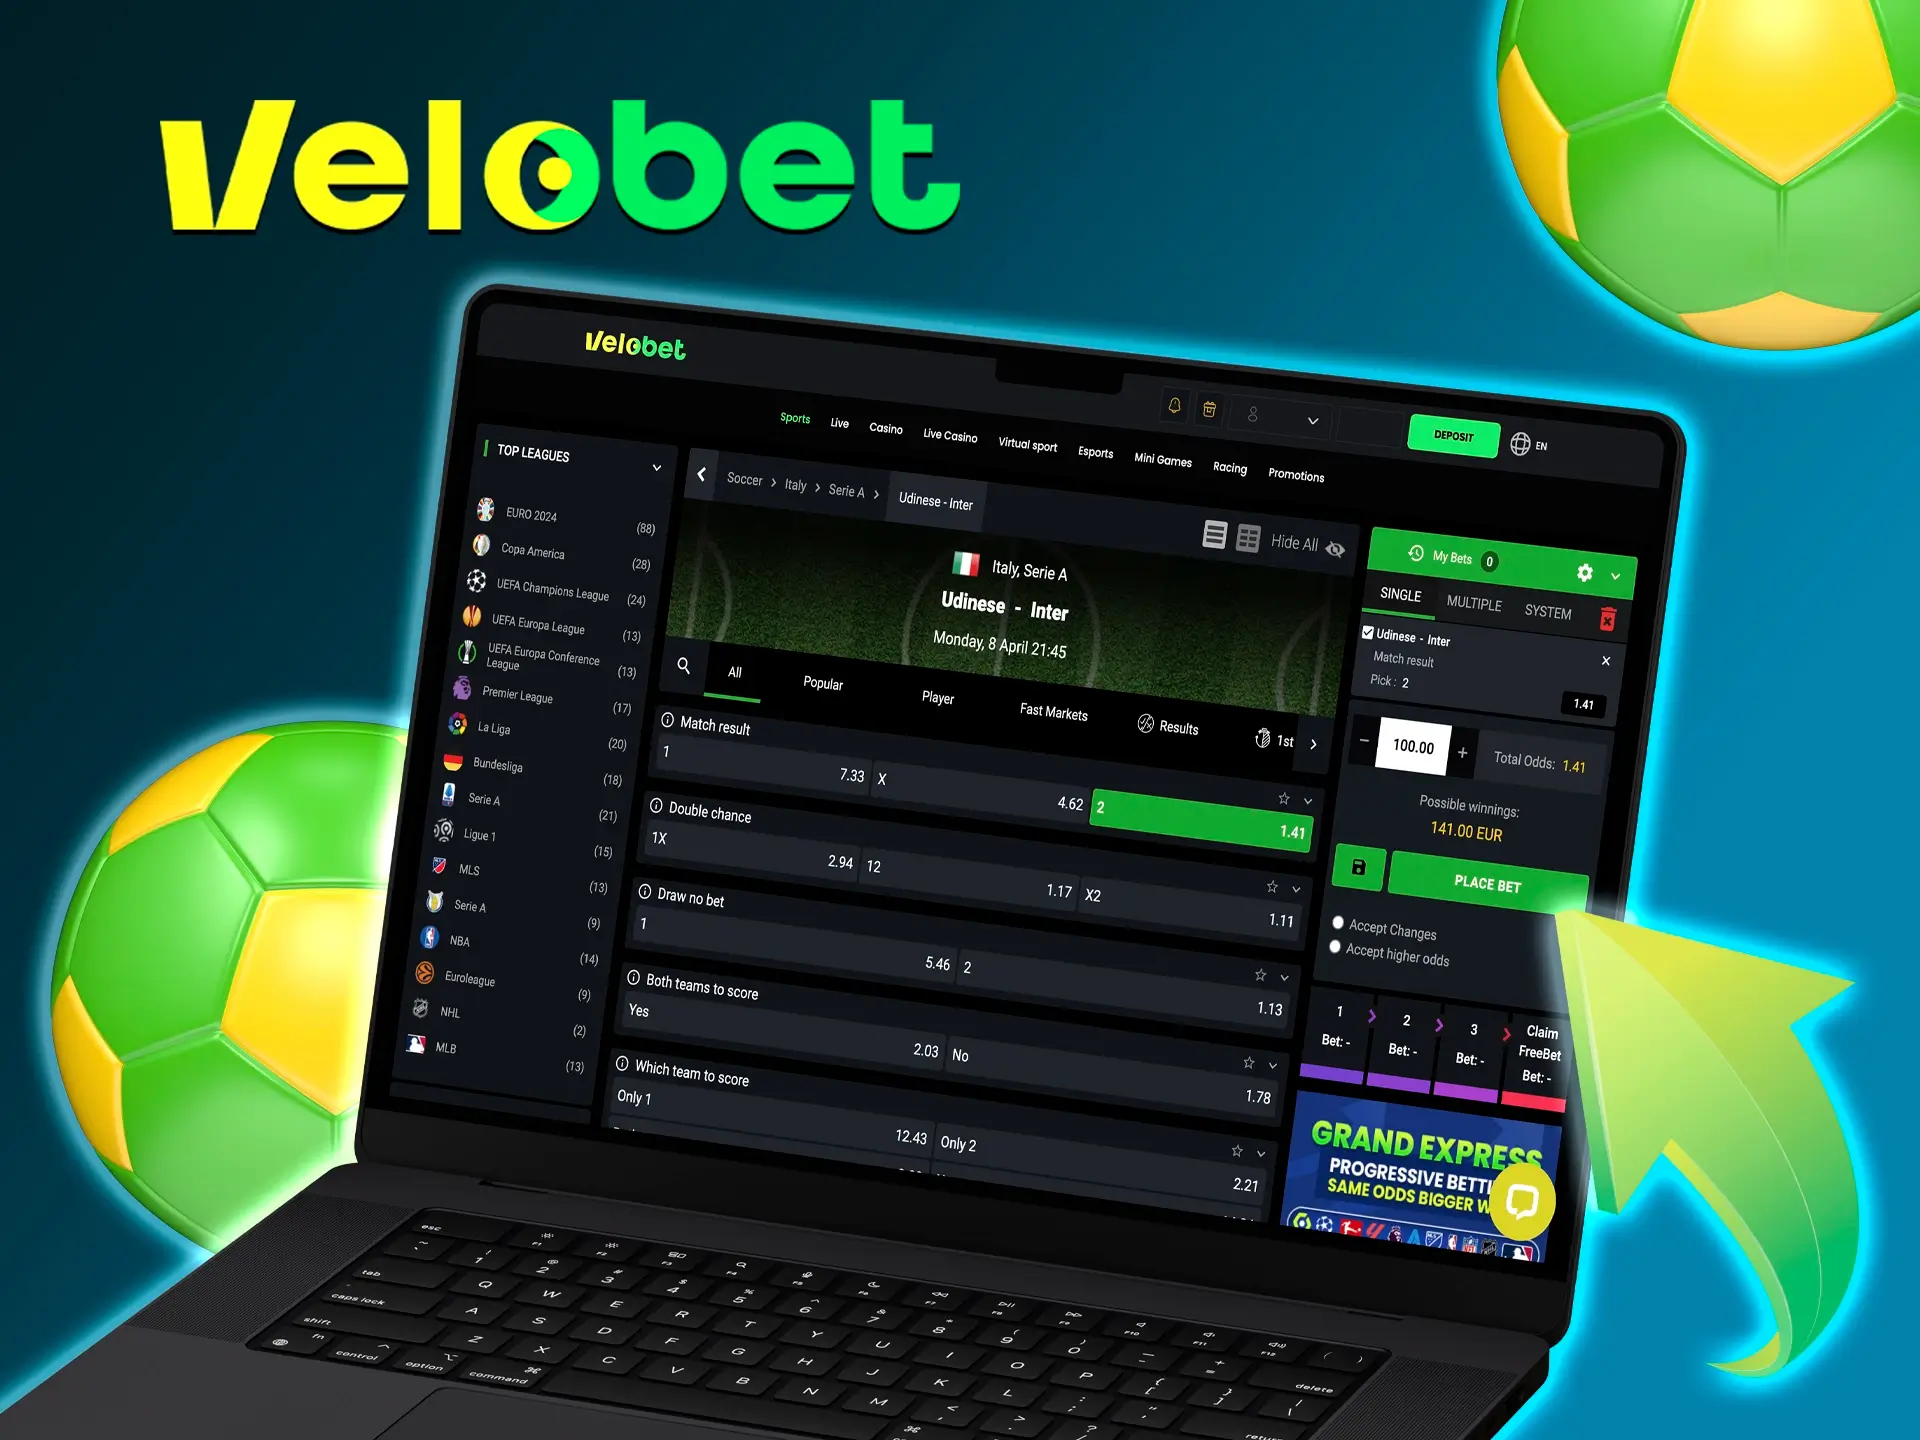 Complete your registration, activate your bonus and place your first winning bet at Velobet.